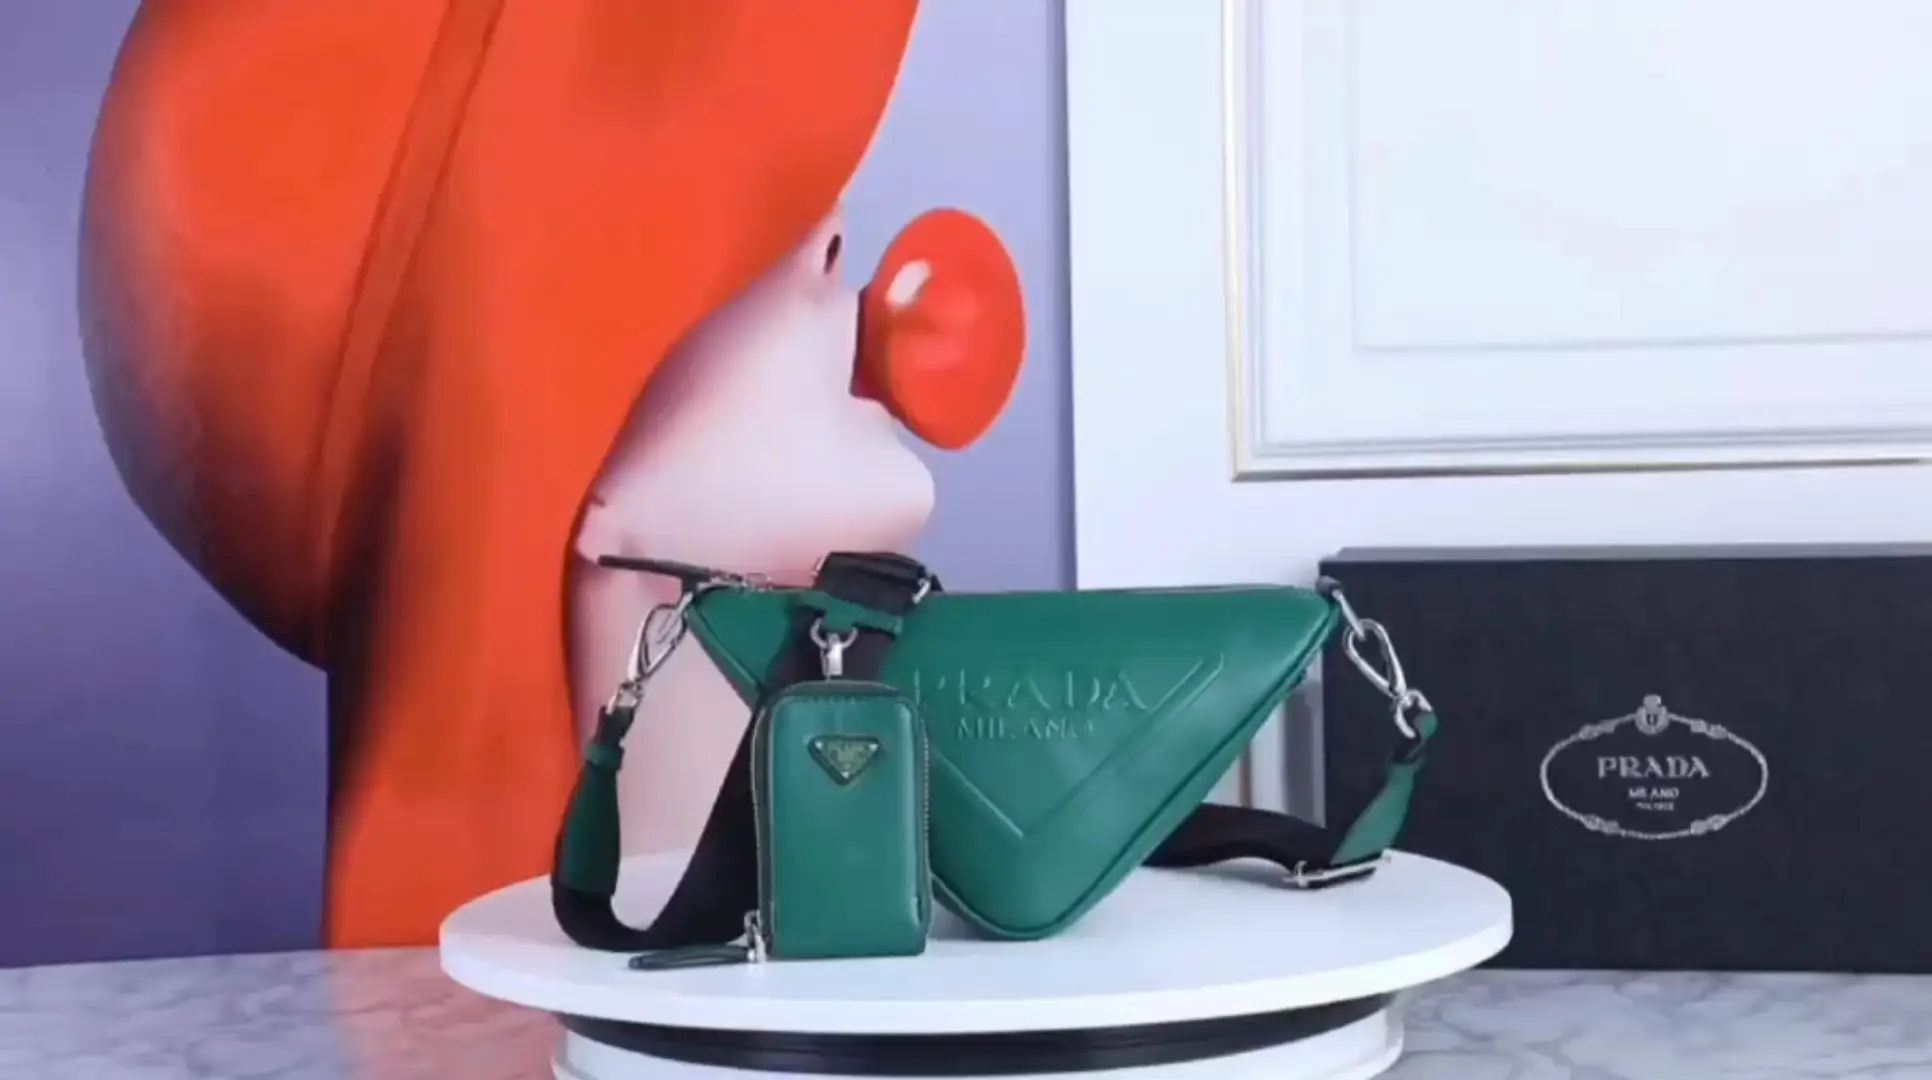 STYLE THIS PRADA BAG WITH ME, Gallery posted by Olivia Hope